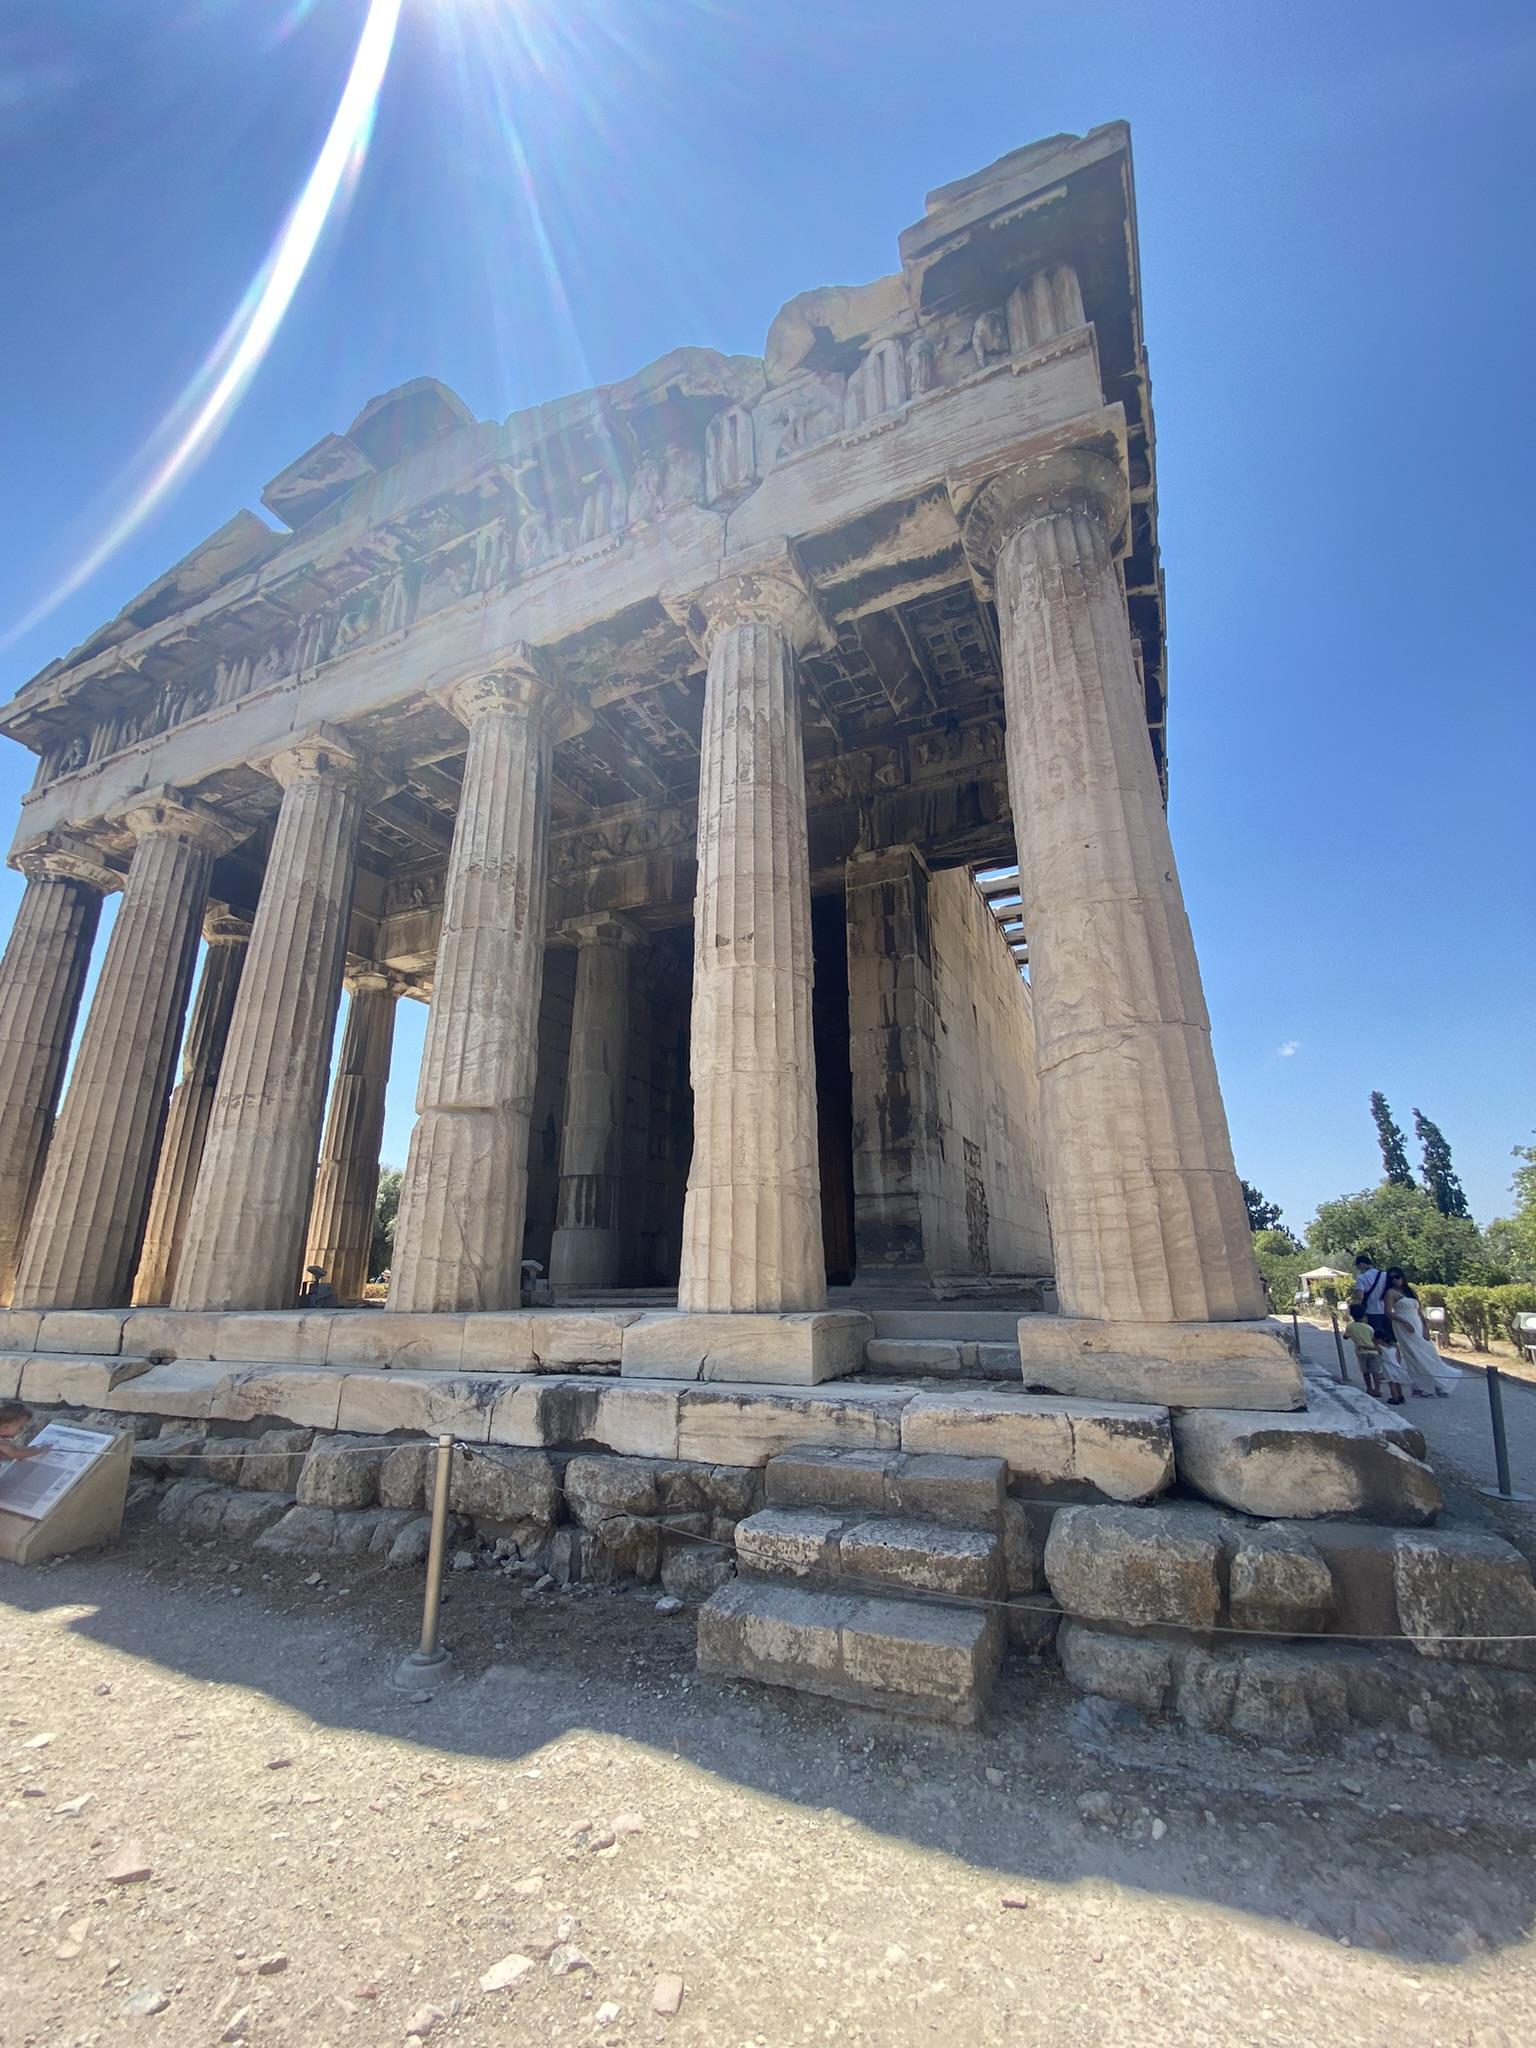 "The temple of Hephaestus in Athens" -Danielle Kirby, Undergraduate 2nd Place